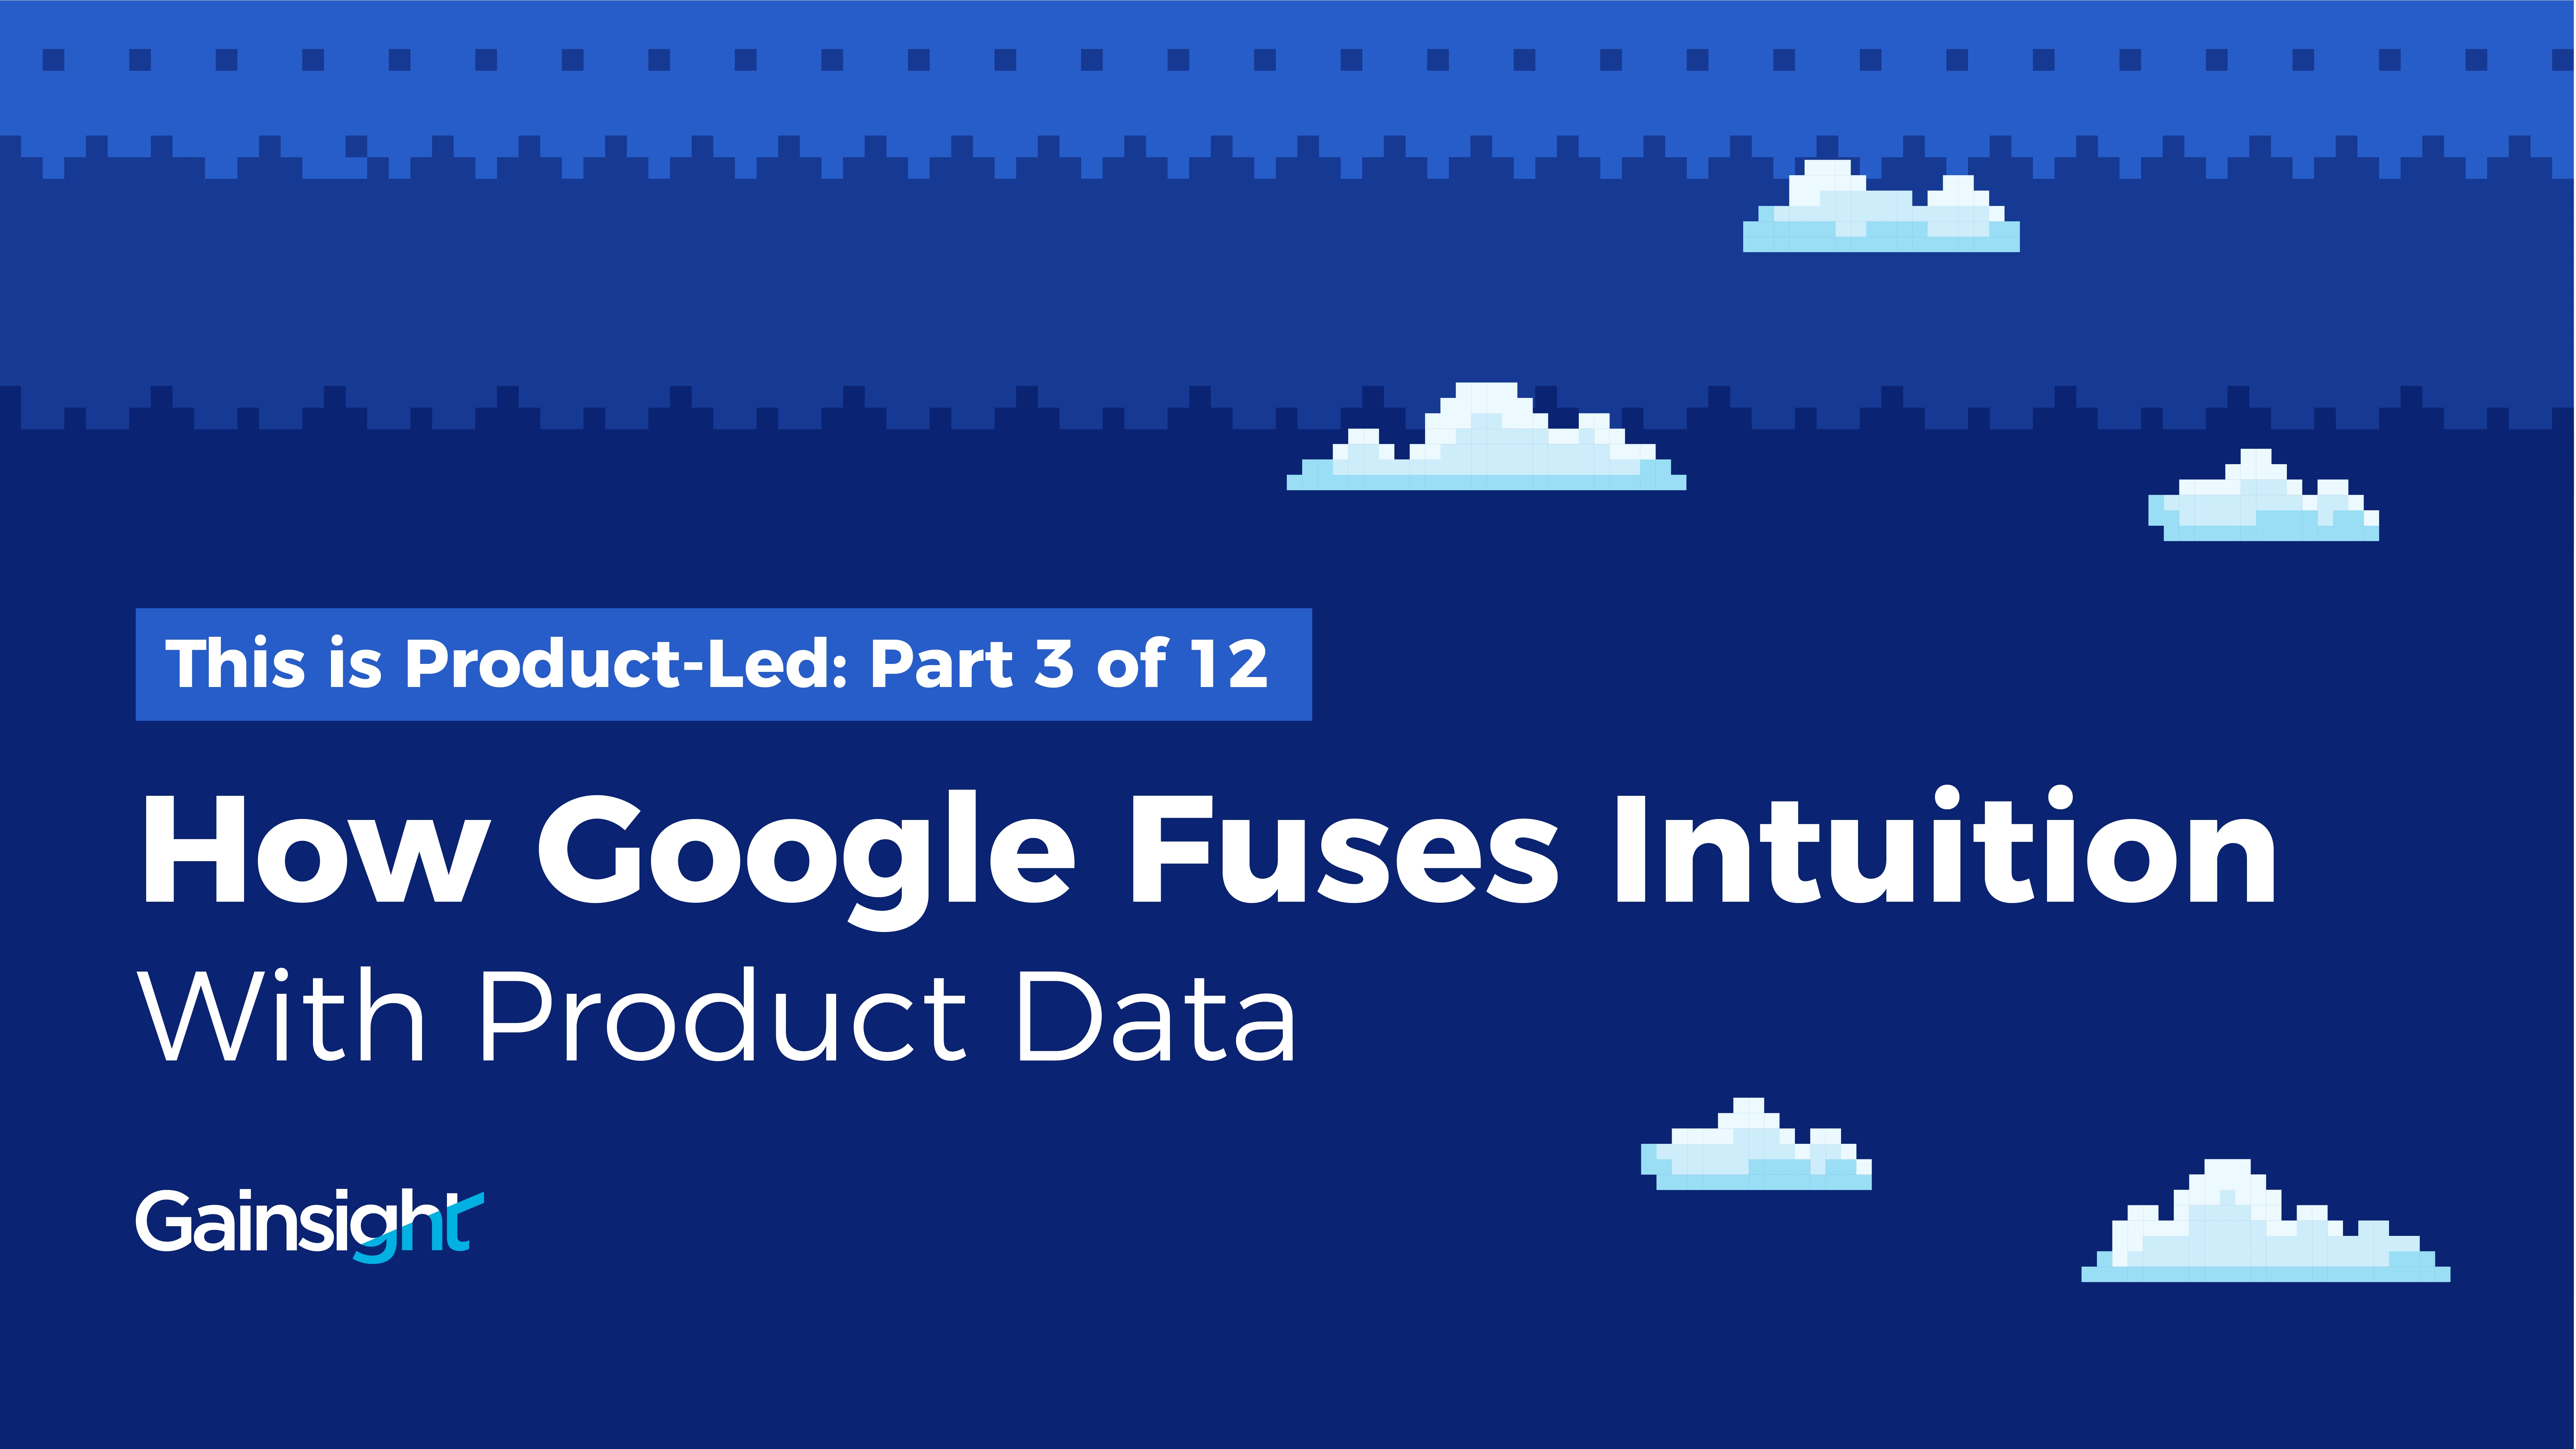 How Google Fuses Intuition With Product Data Image